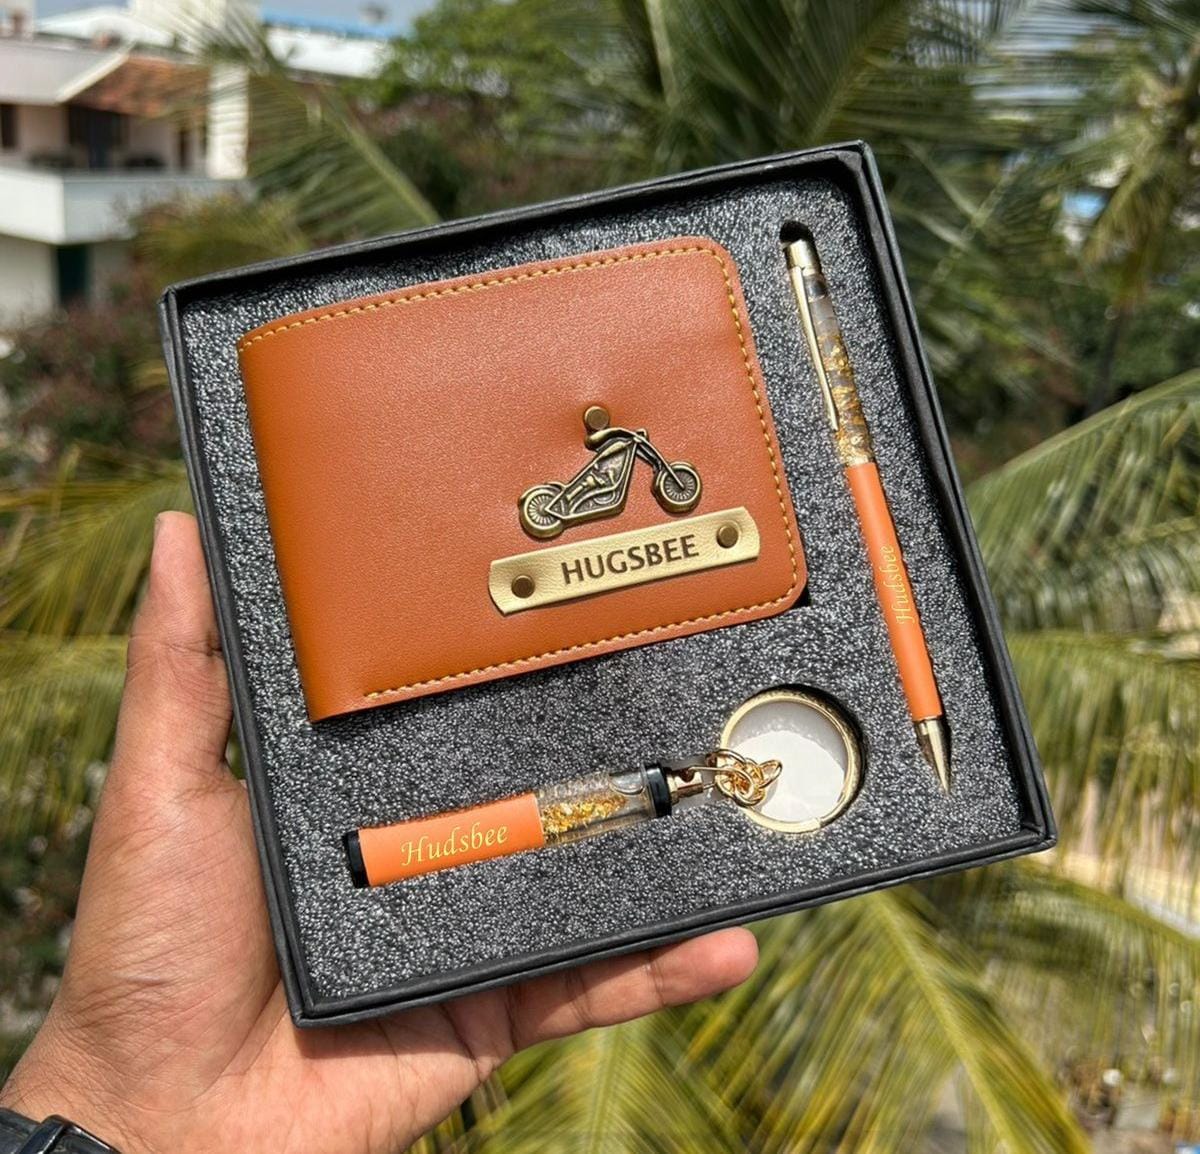 Personalized Keychain Wallet